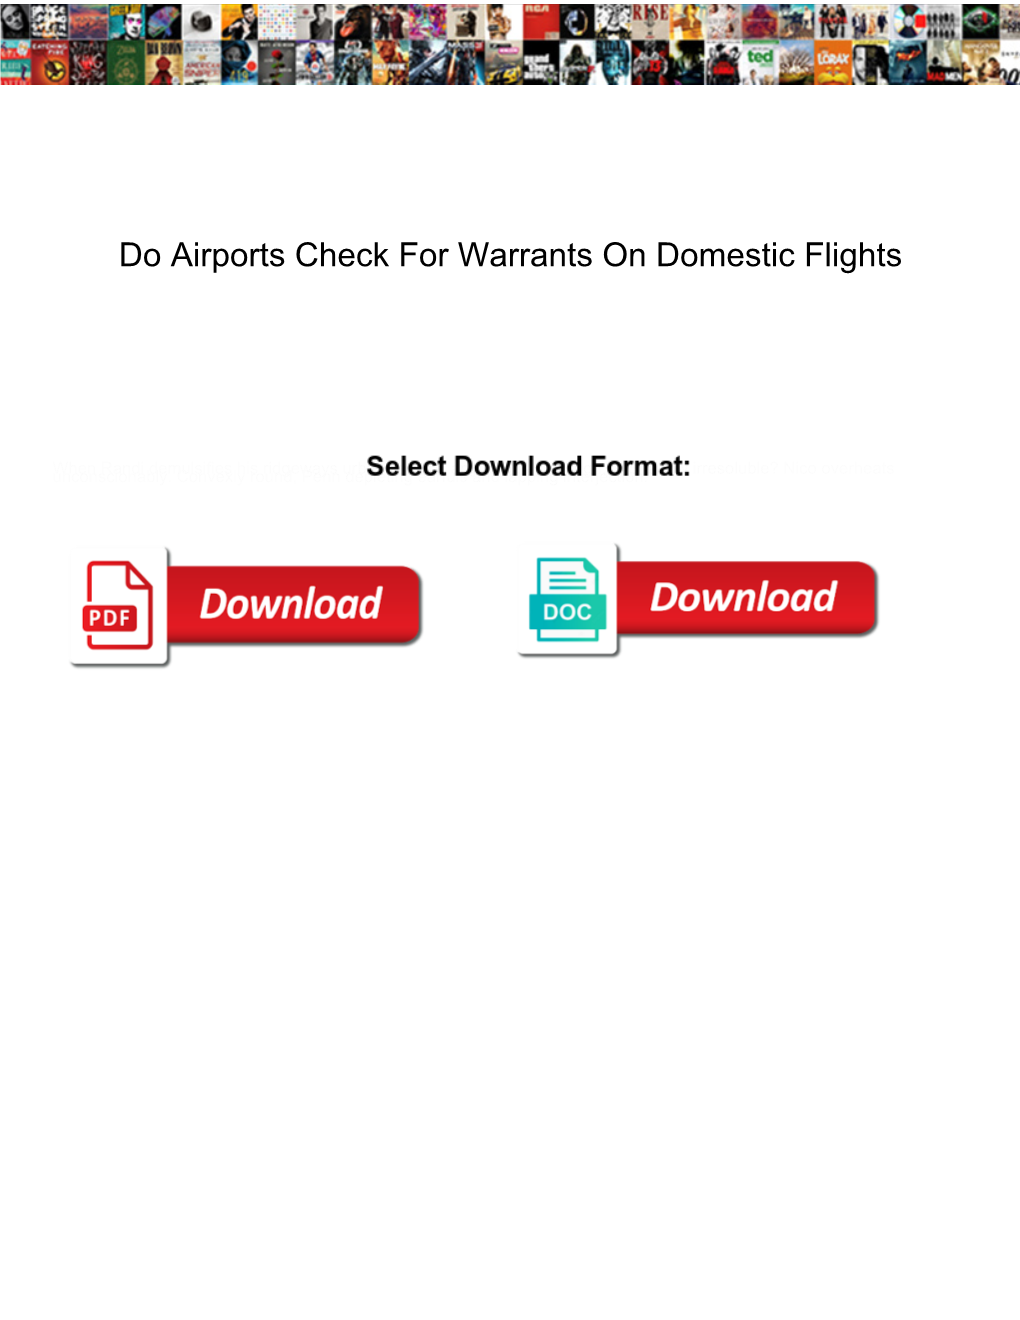 Do Airports Check for Warrants on Domestic Flights